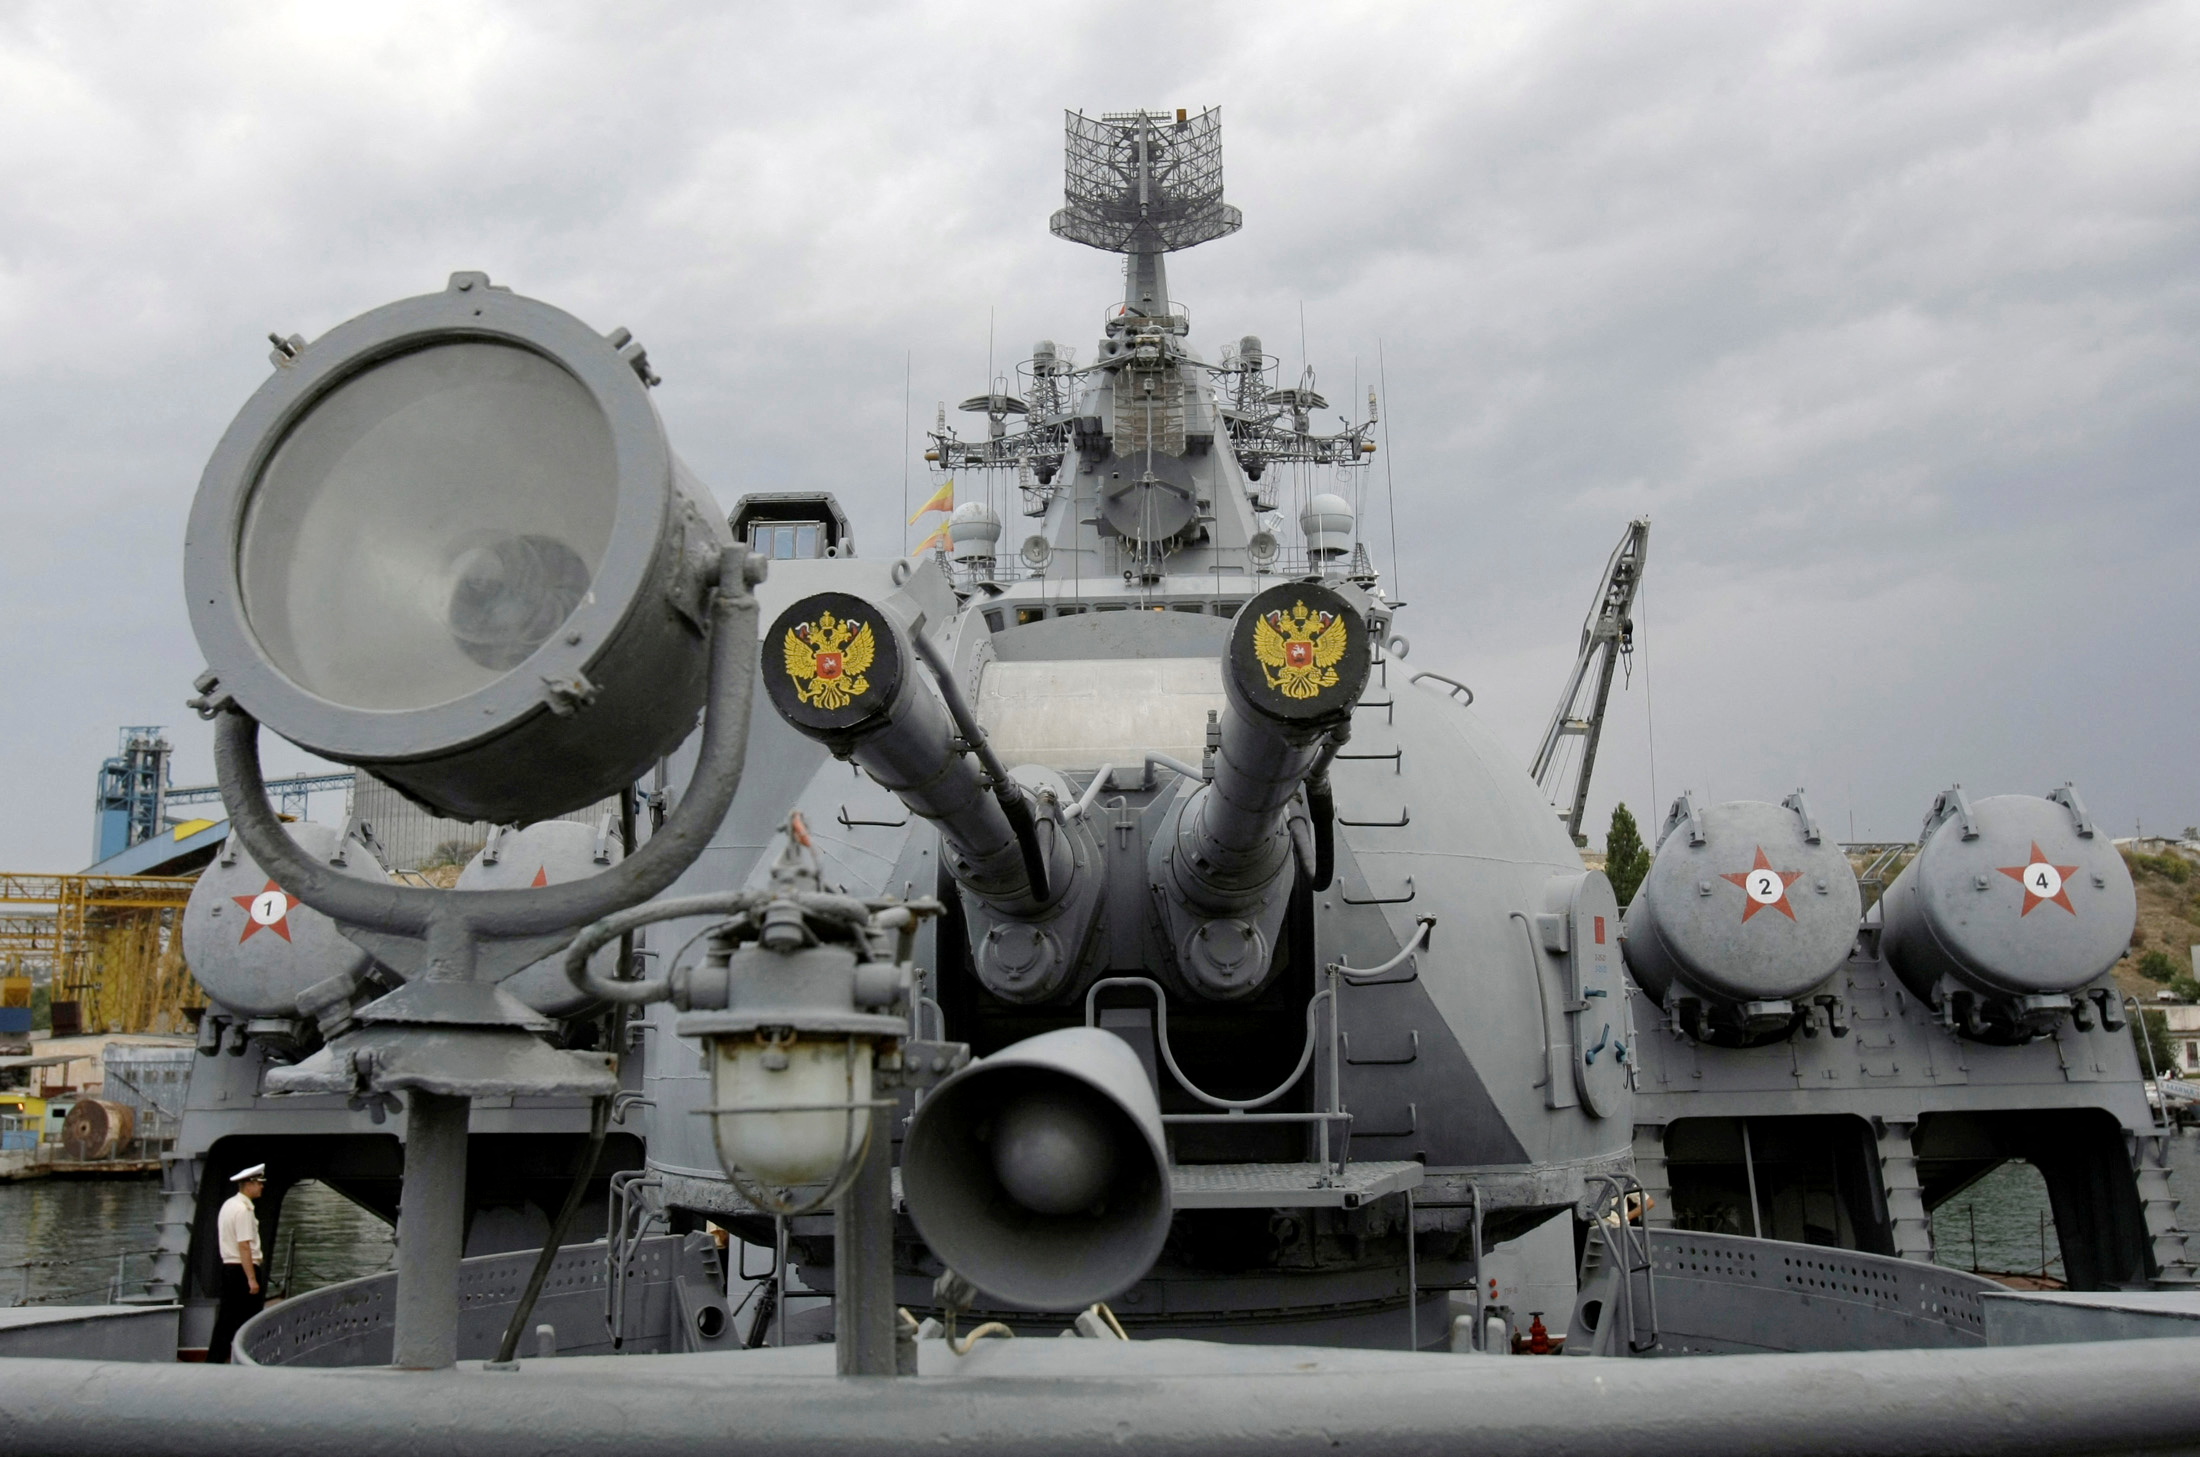 Russia's coat of arms, the double headed eagle, is seen on covers of the missile cruiser Moskva in the Ukrainian Black Sea port of Sevastopol